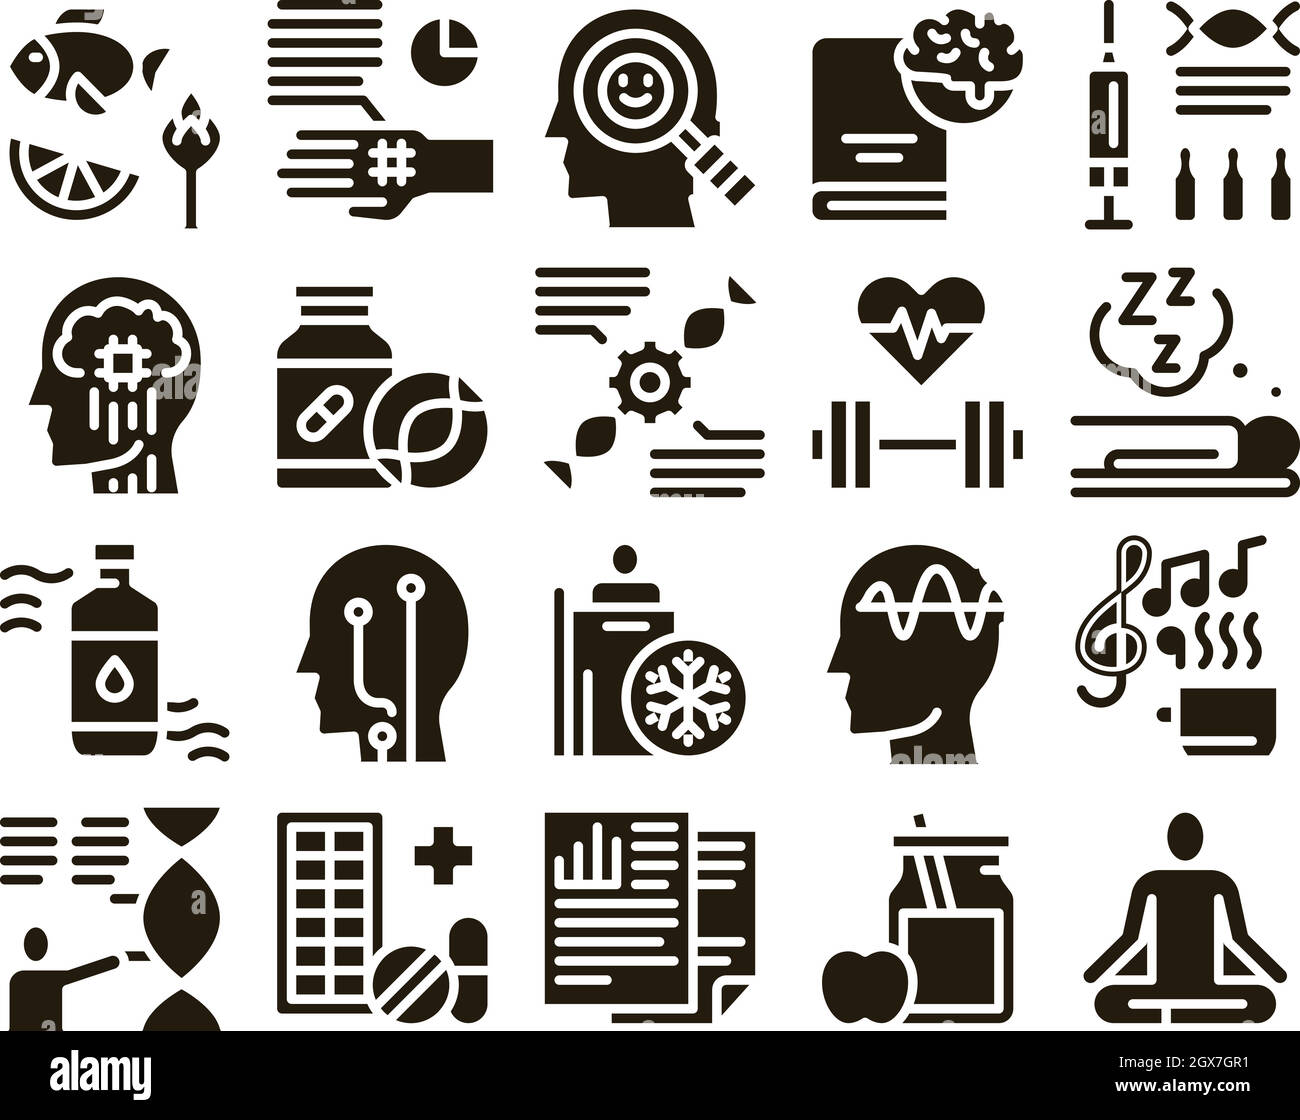 Biohacking Collection Elements Icons Set Vector Stock Vector